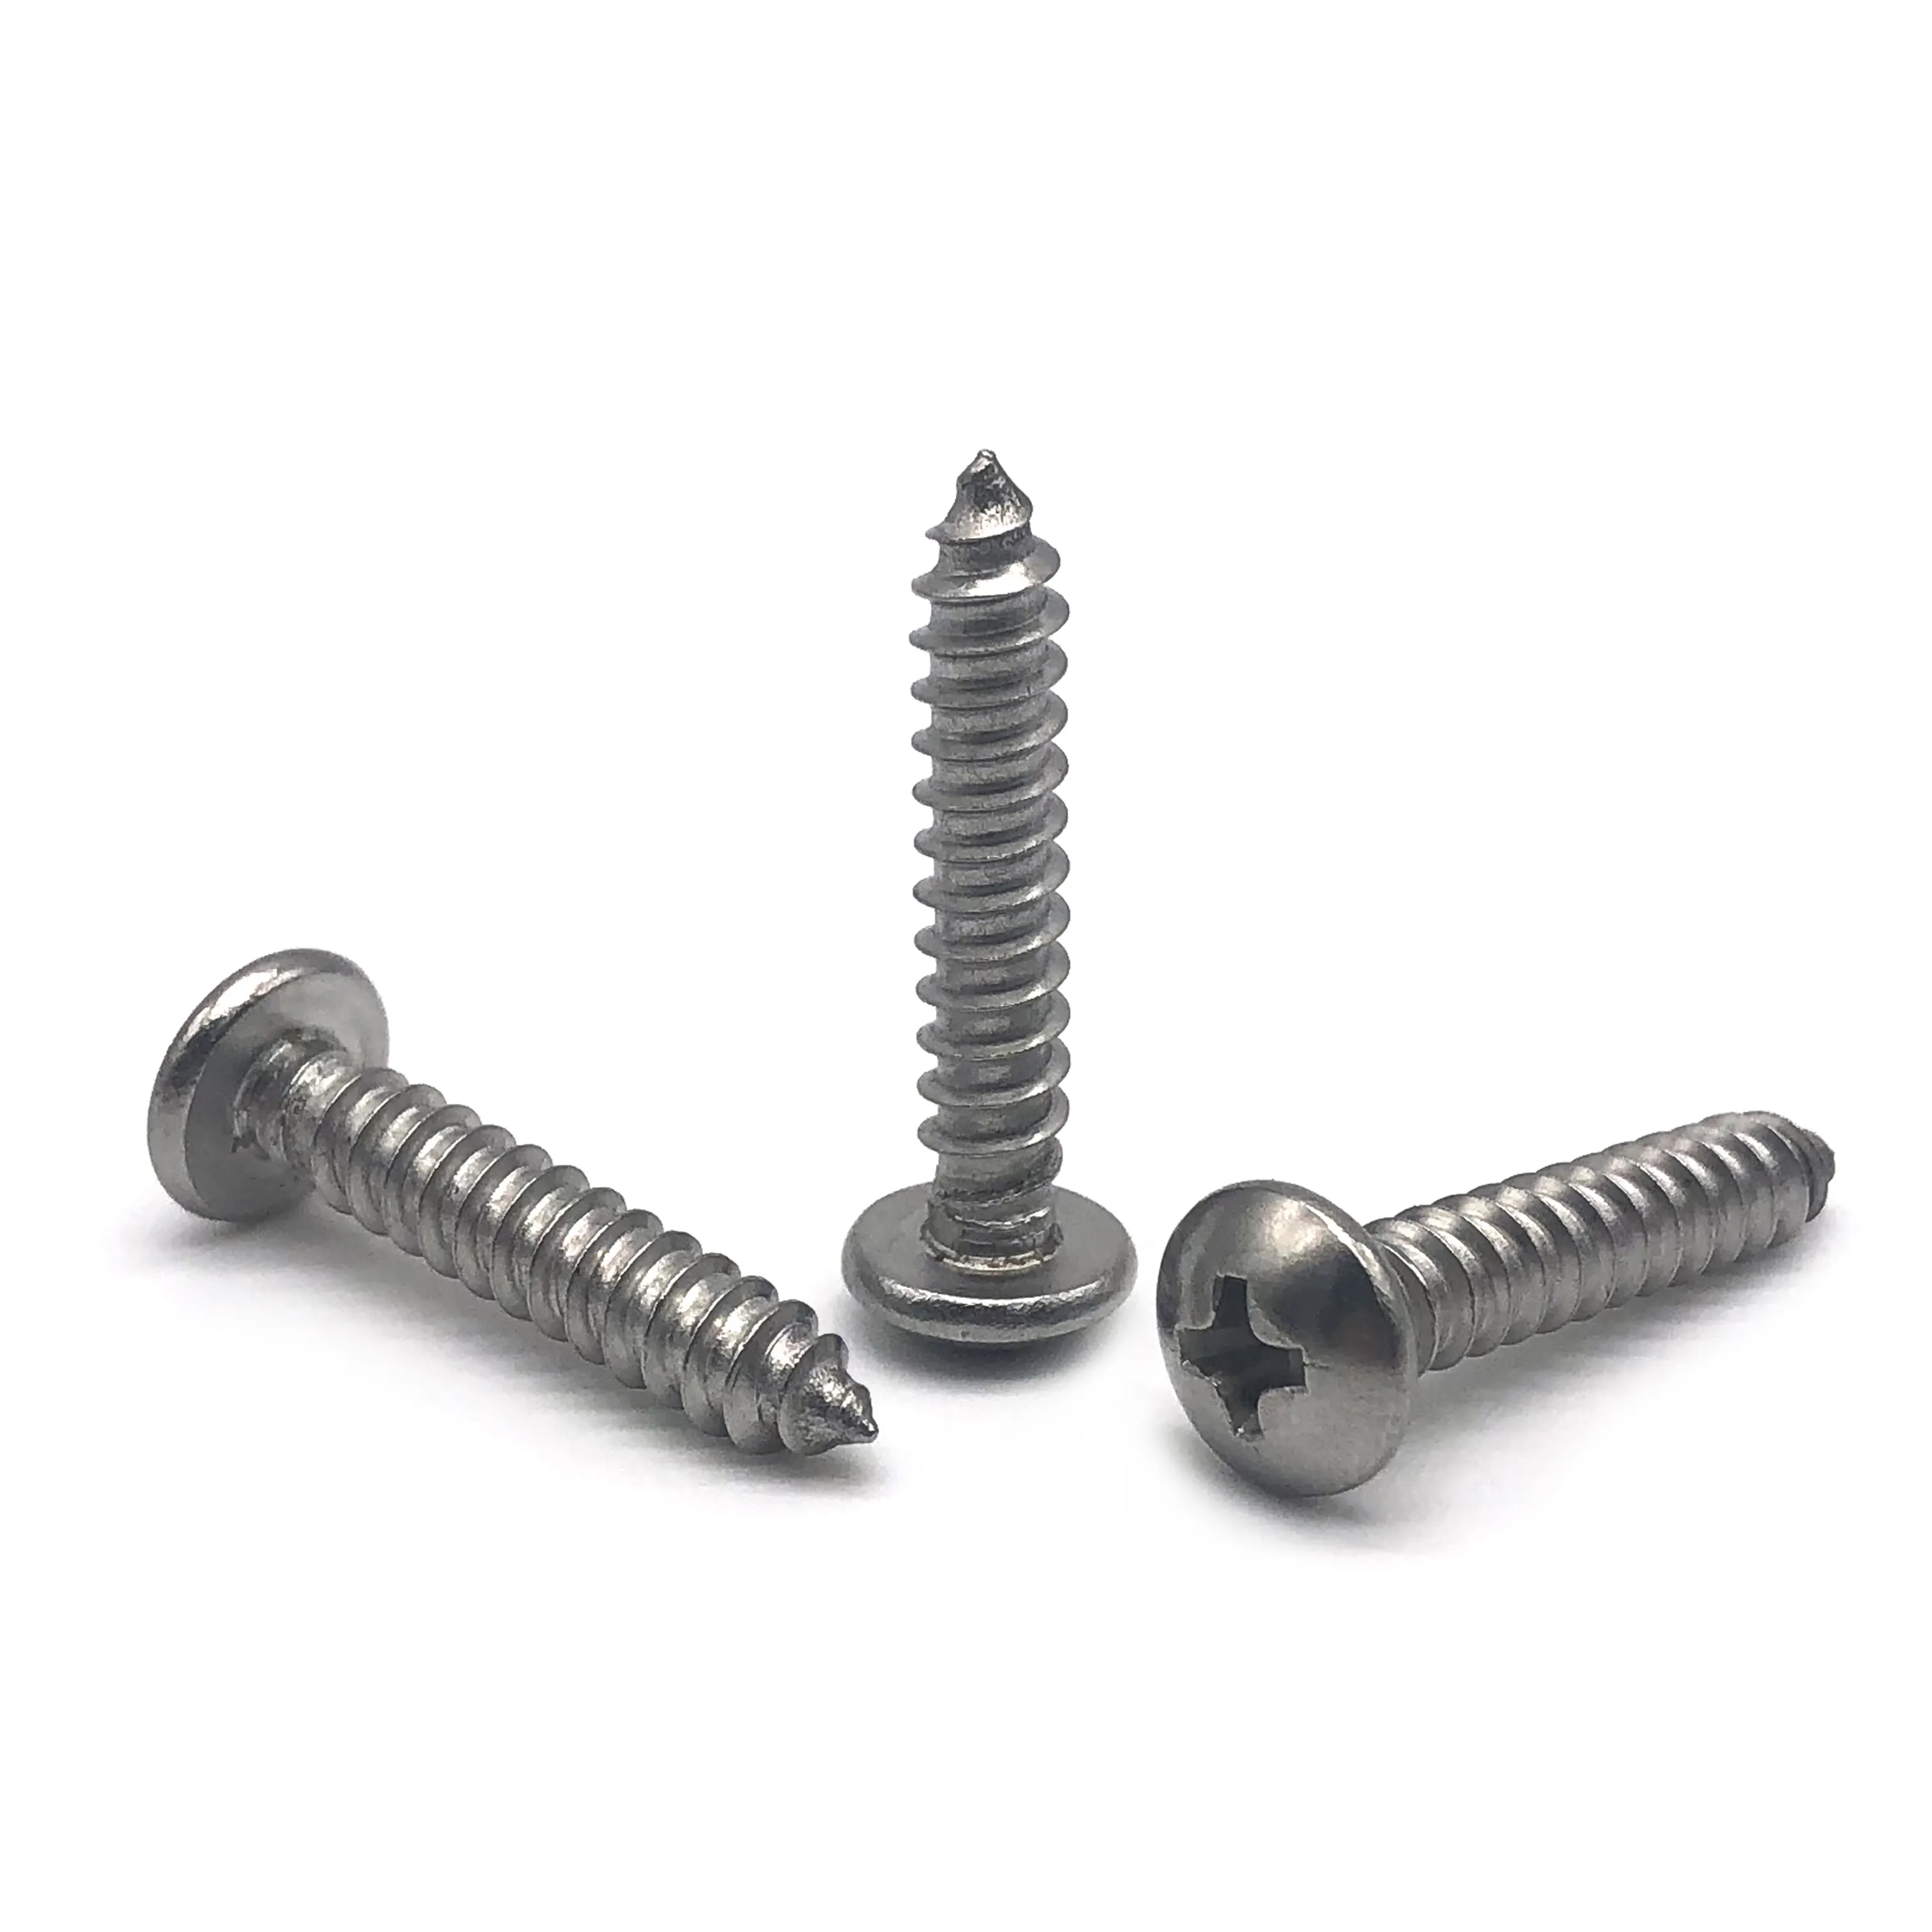 China manufacture wholesale galvanized pan head concrete wood self tapping screw for plastic stainless steel metal roofing screw